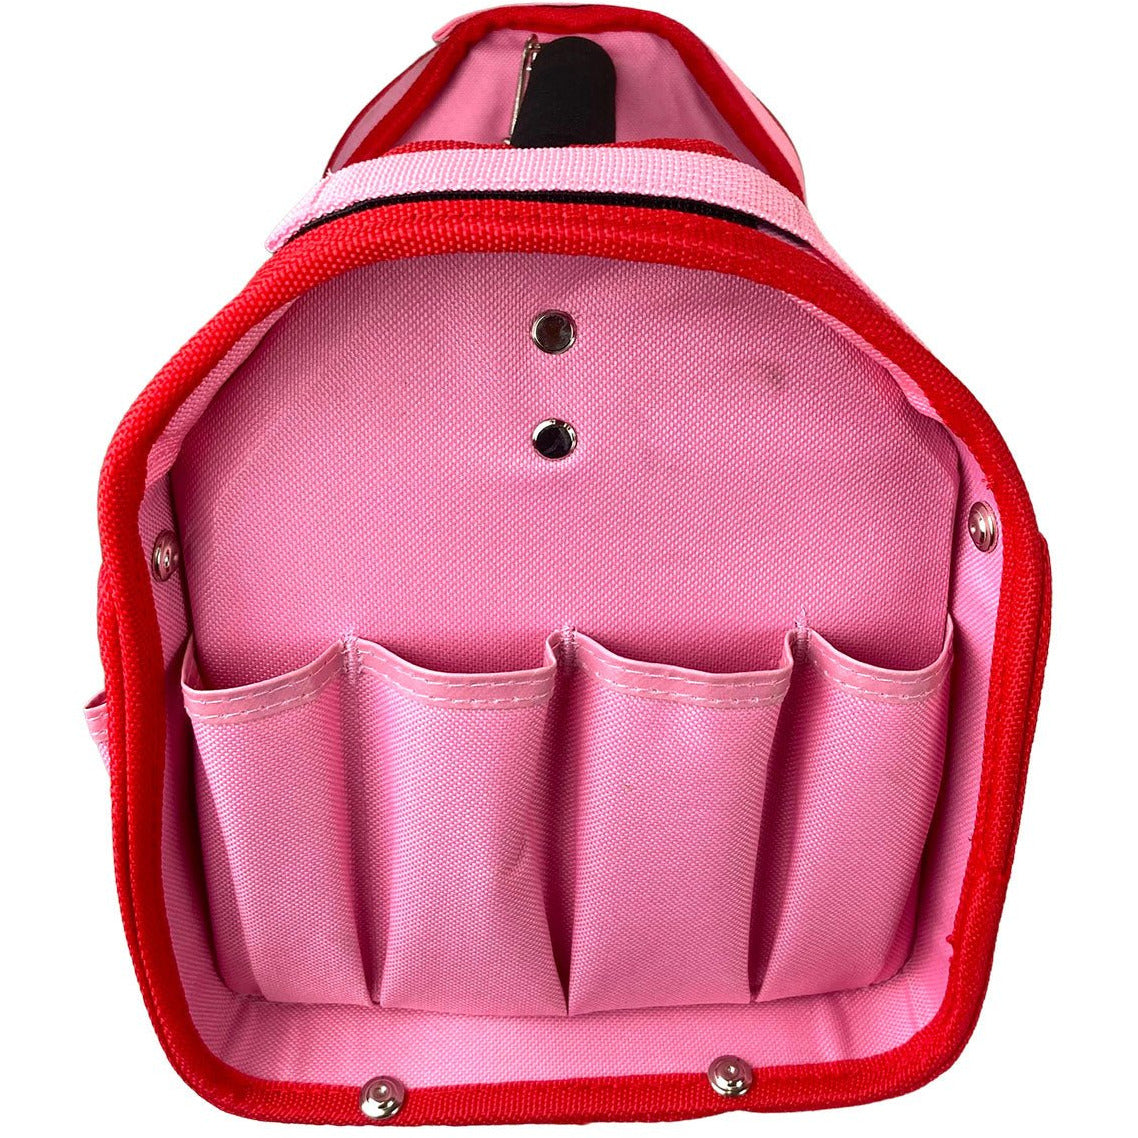 Pink Tool Carry-All with Multiple Pockets and Metal Handle - AB73-13W-PNK